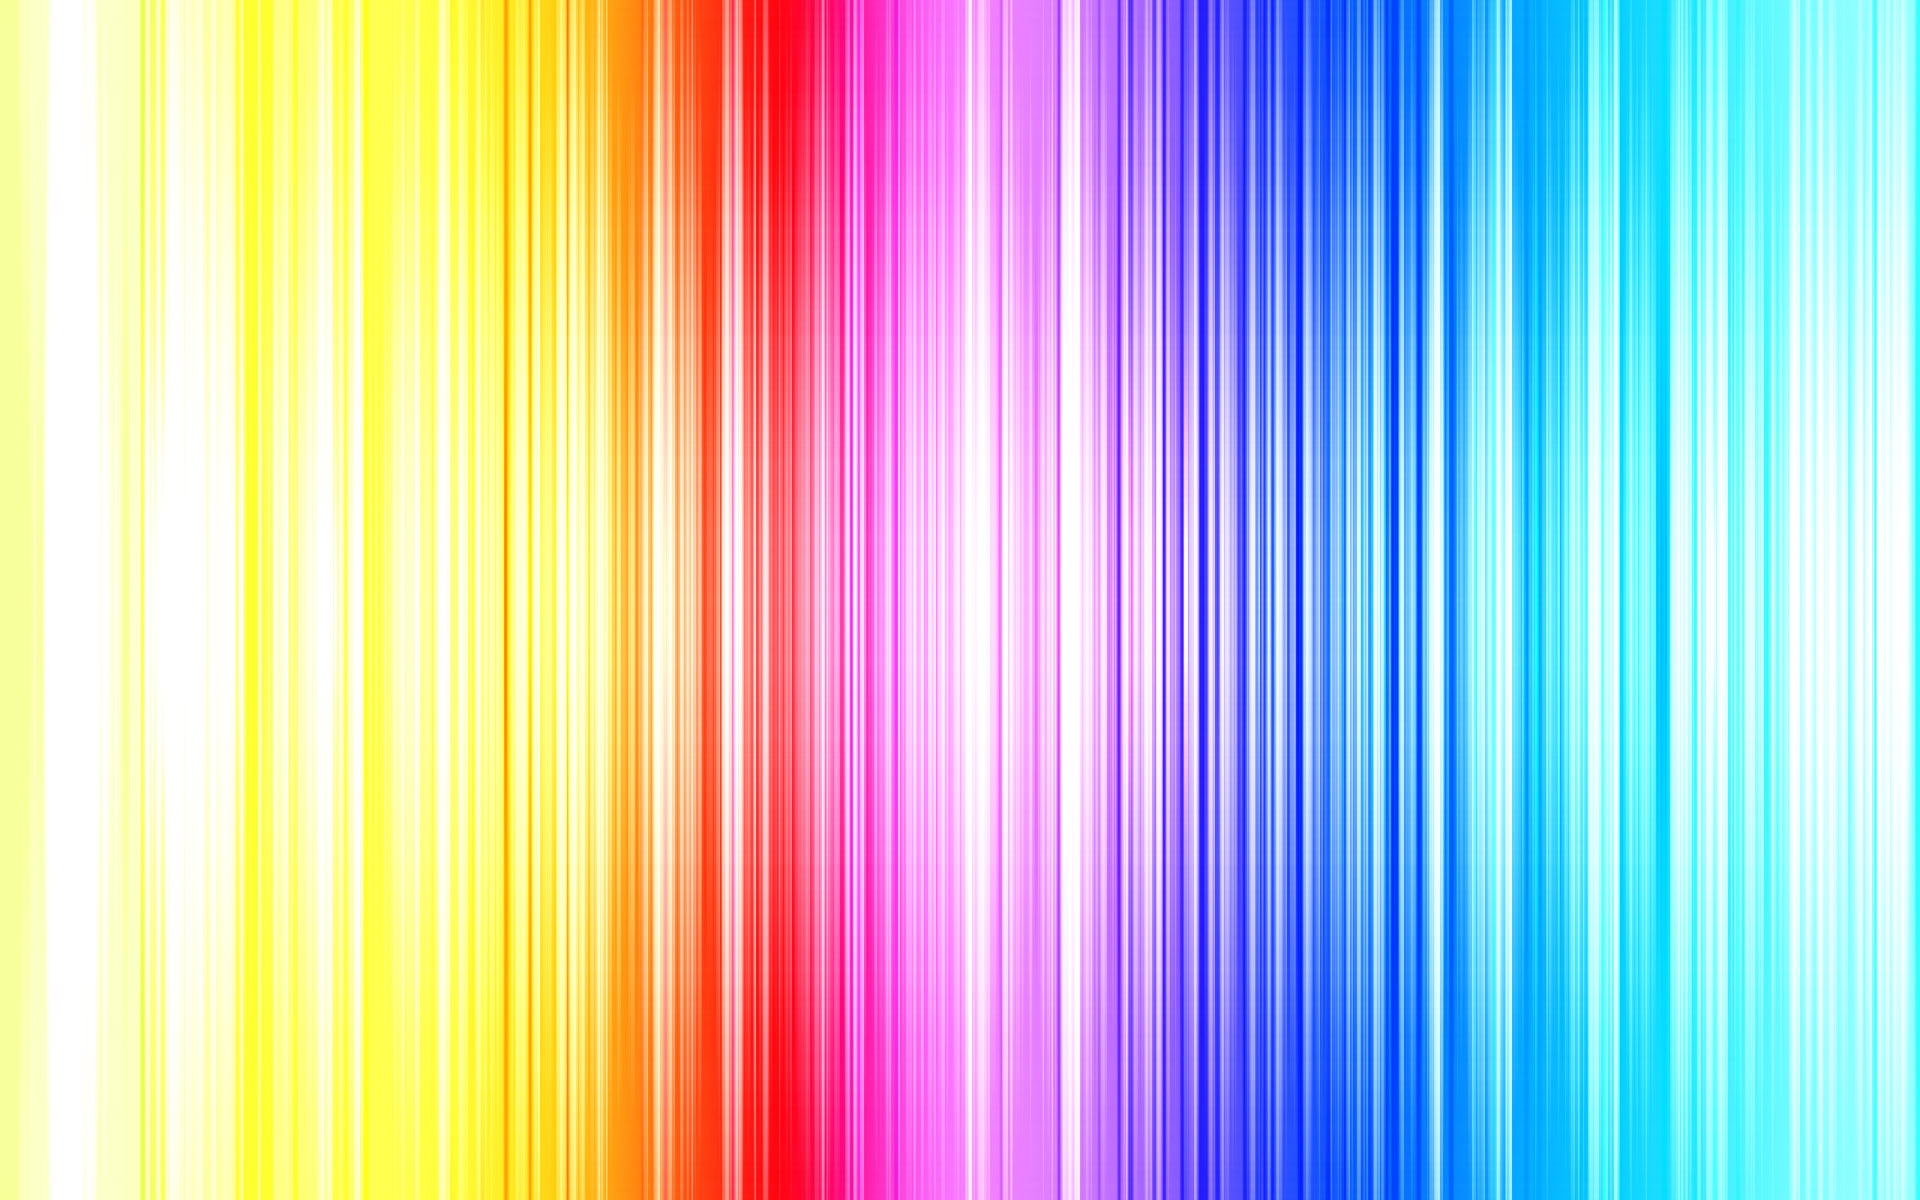  Free Colorful Backgrounds